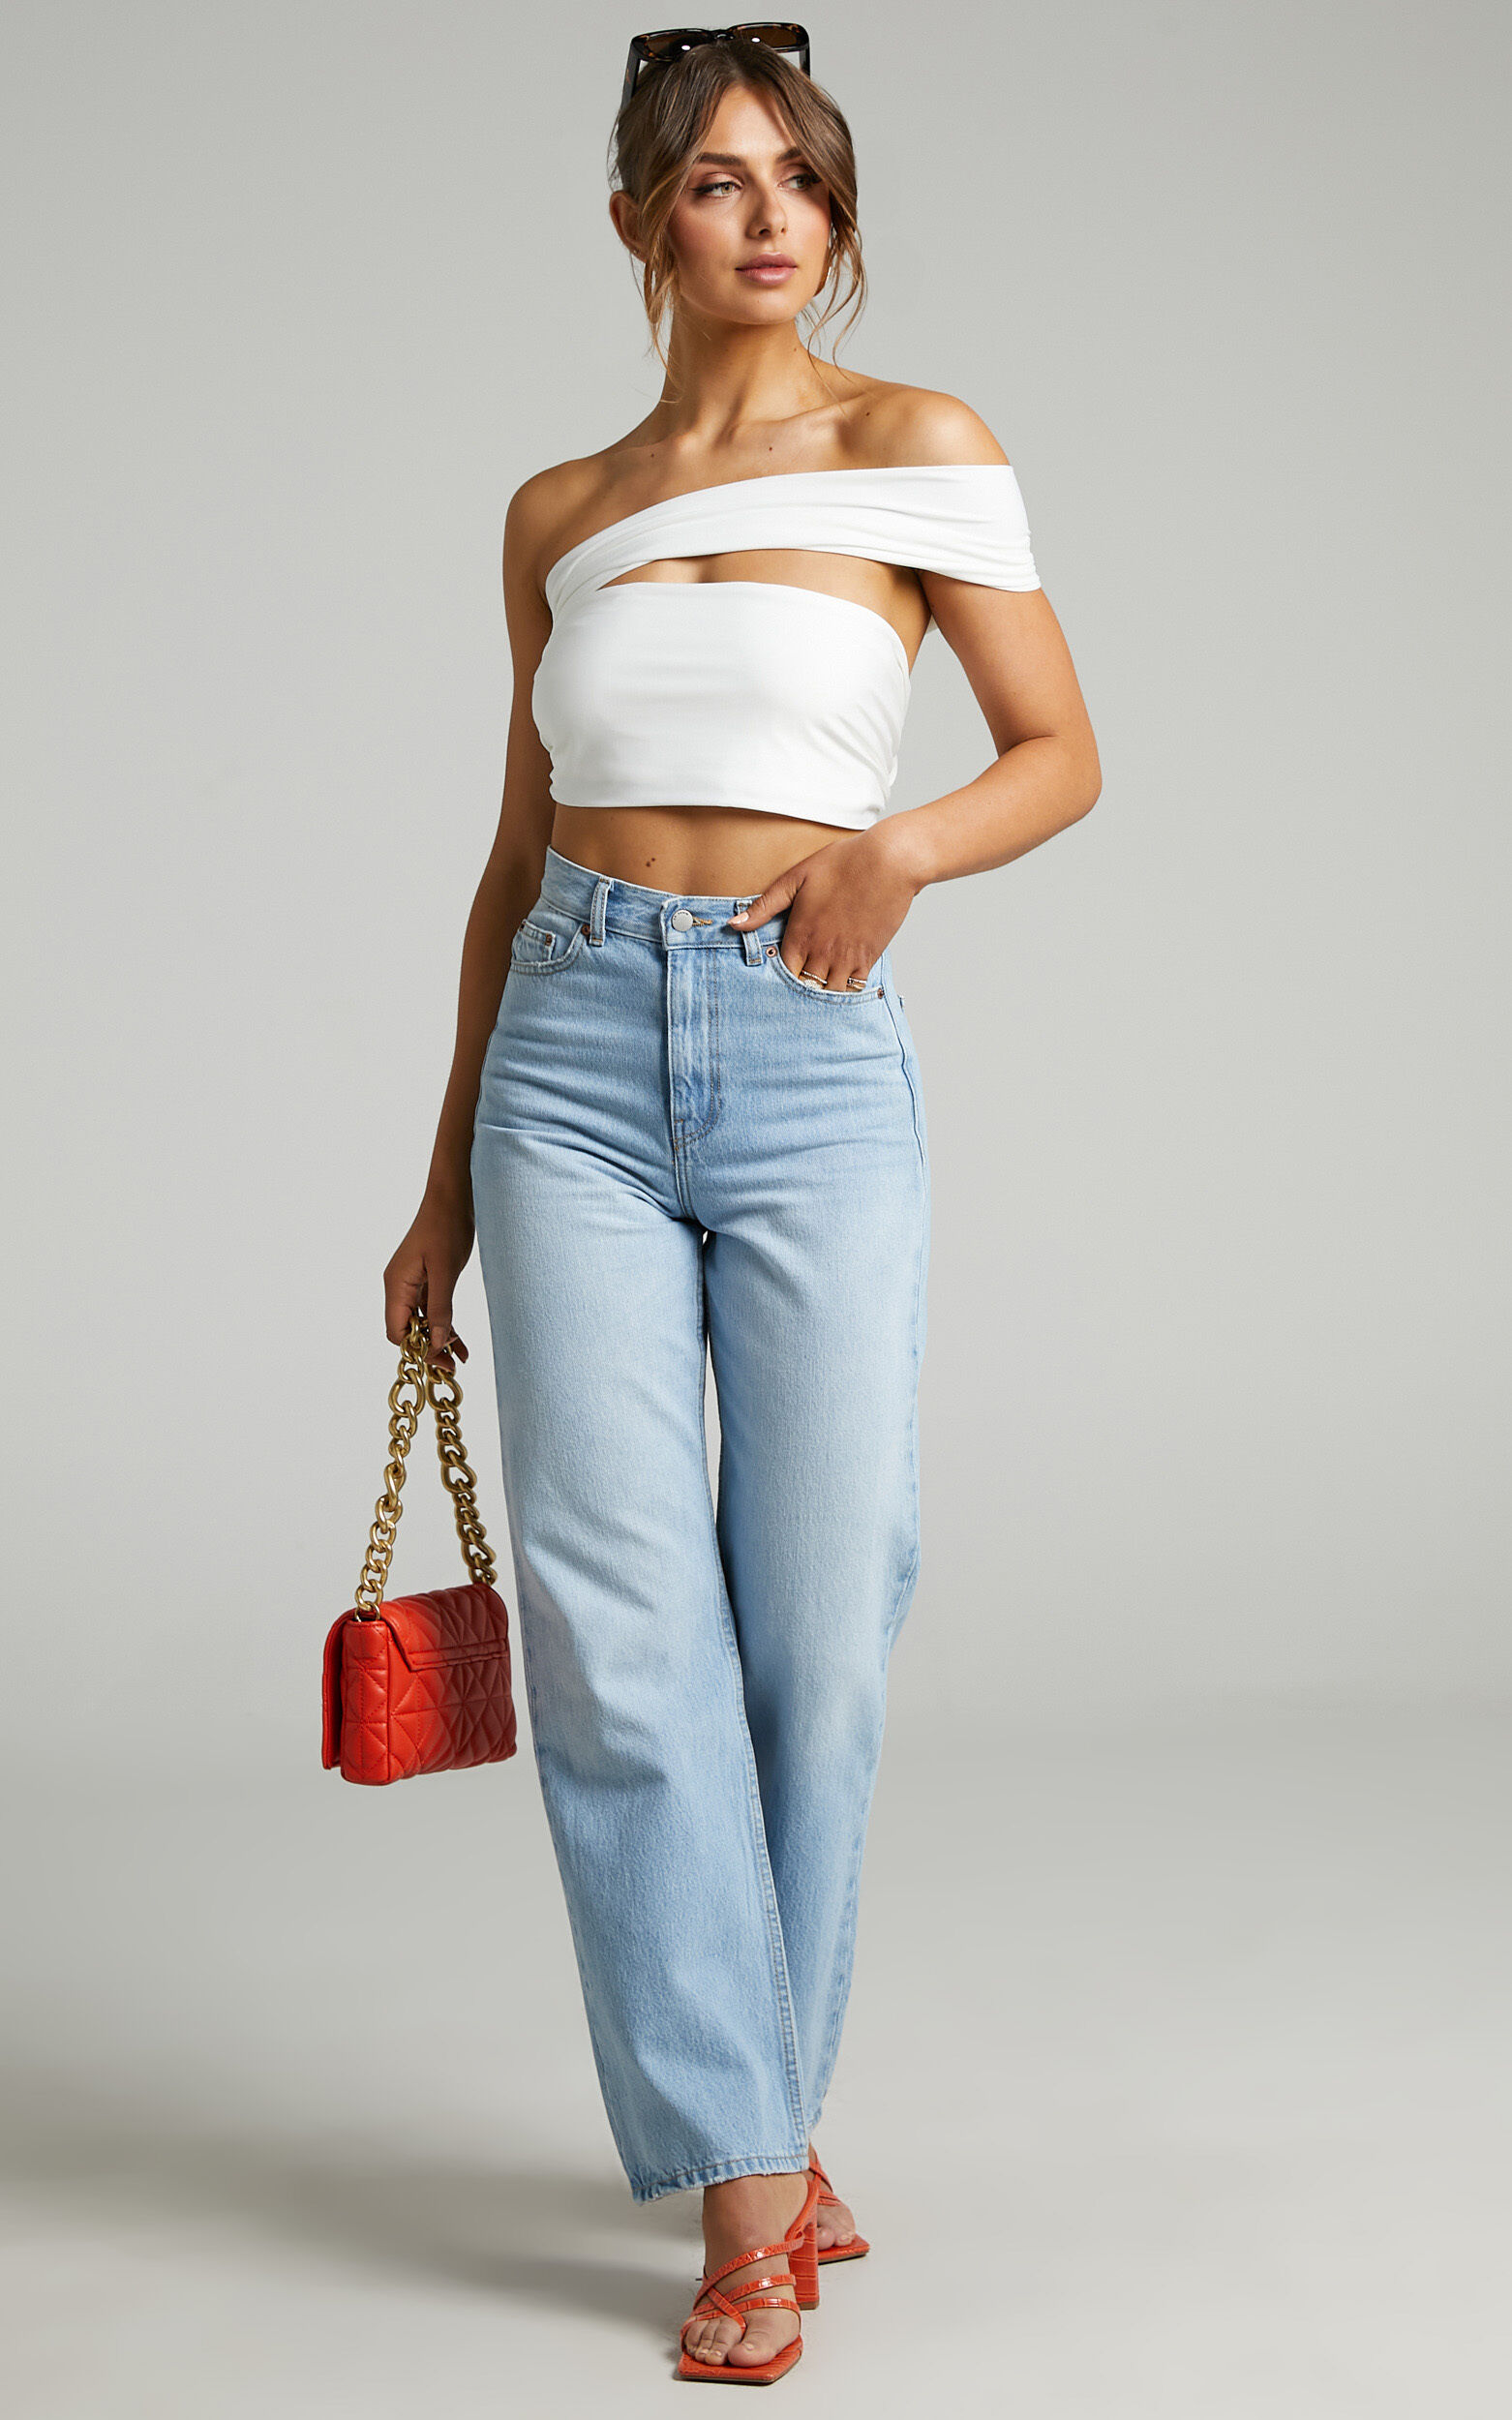 Lilah Multi Tie Crop Top in White - 06, WHT3, super-hi-res image number null